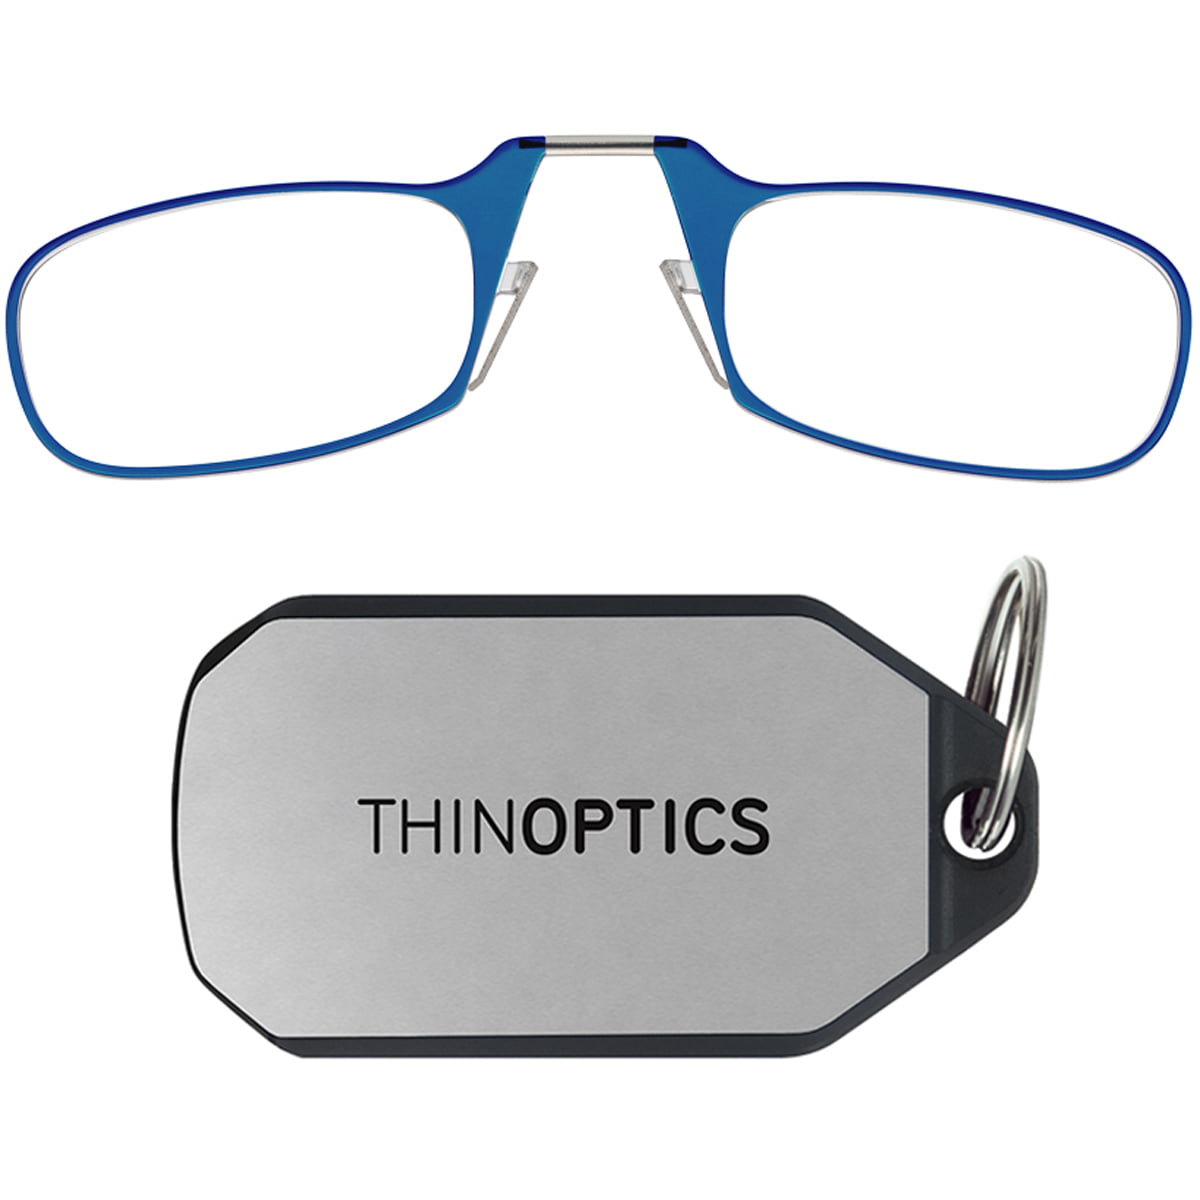 ThinOptics Armless Reading Glasses with Keychain Case 1 00 Blue Silver 0d14b849 00bf 4298 839b 98fefe3f210d.7d283a9bcce8e3a12bc8fd12d1f562a4